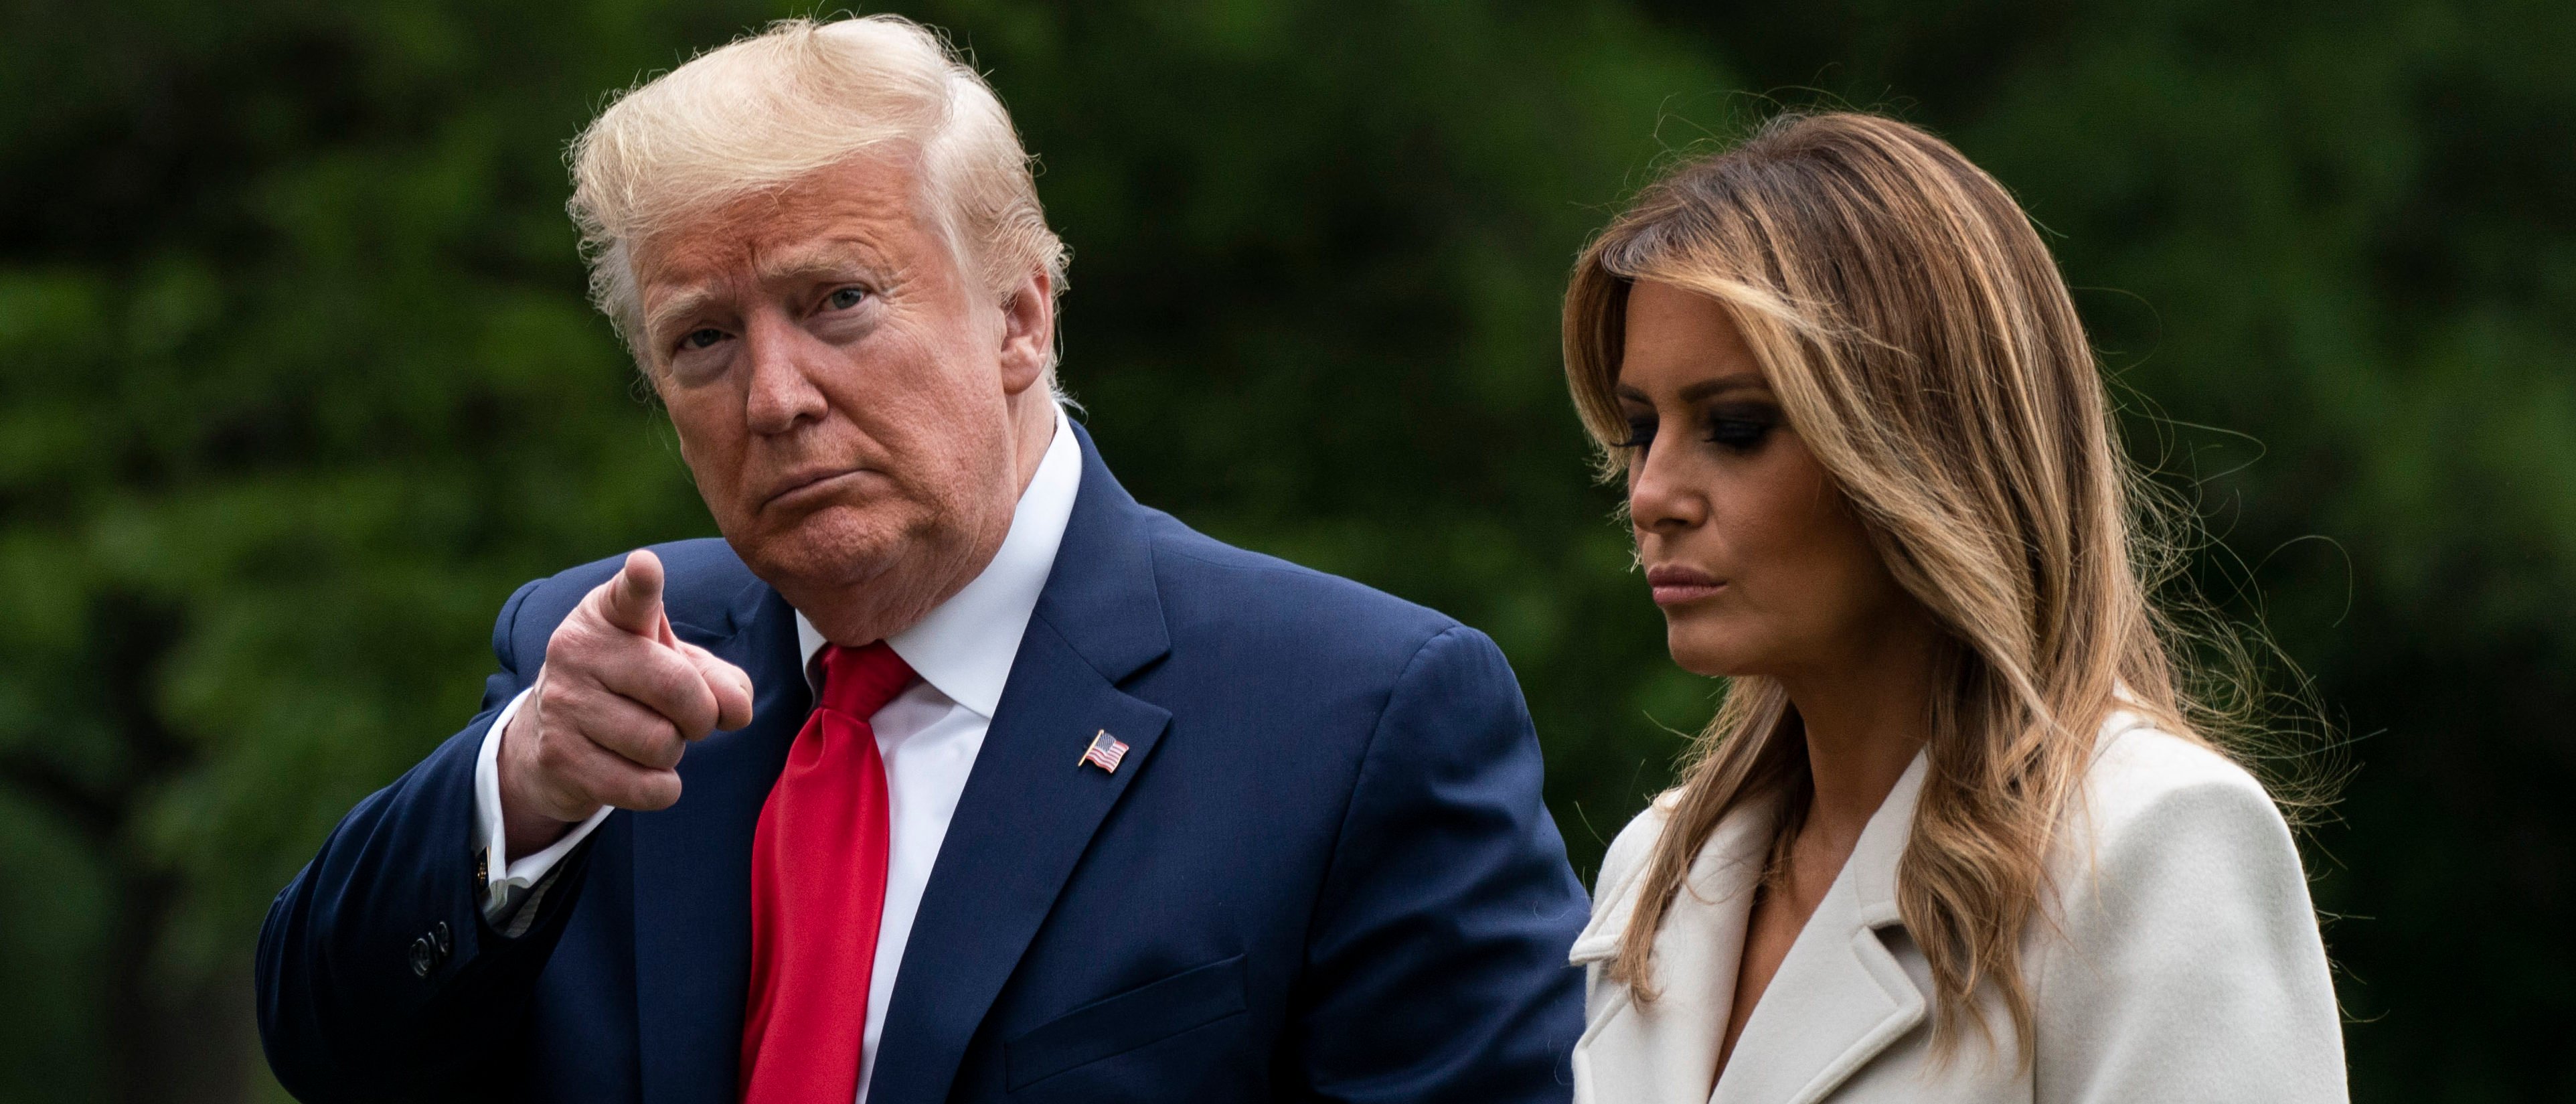 WASHINGTON, DC - MAY 25: U.S. President Donald Trump and first lady Melania Trump arrive to the South Lawn of the White House after a trip to Baltimore, Maryland on May 25, 2020 in Washington, DC. The Trumps attended a Memorial Day ceremony at the Fort McHenry National Monument and Historic Shrine despite objections by Baltimore Mayor Bernard C. Jack Young, whose residents remain under a stay-at-home order due to the coronavirus. (Photo by Sarah Silbiger/Getty Images)